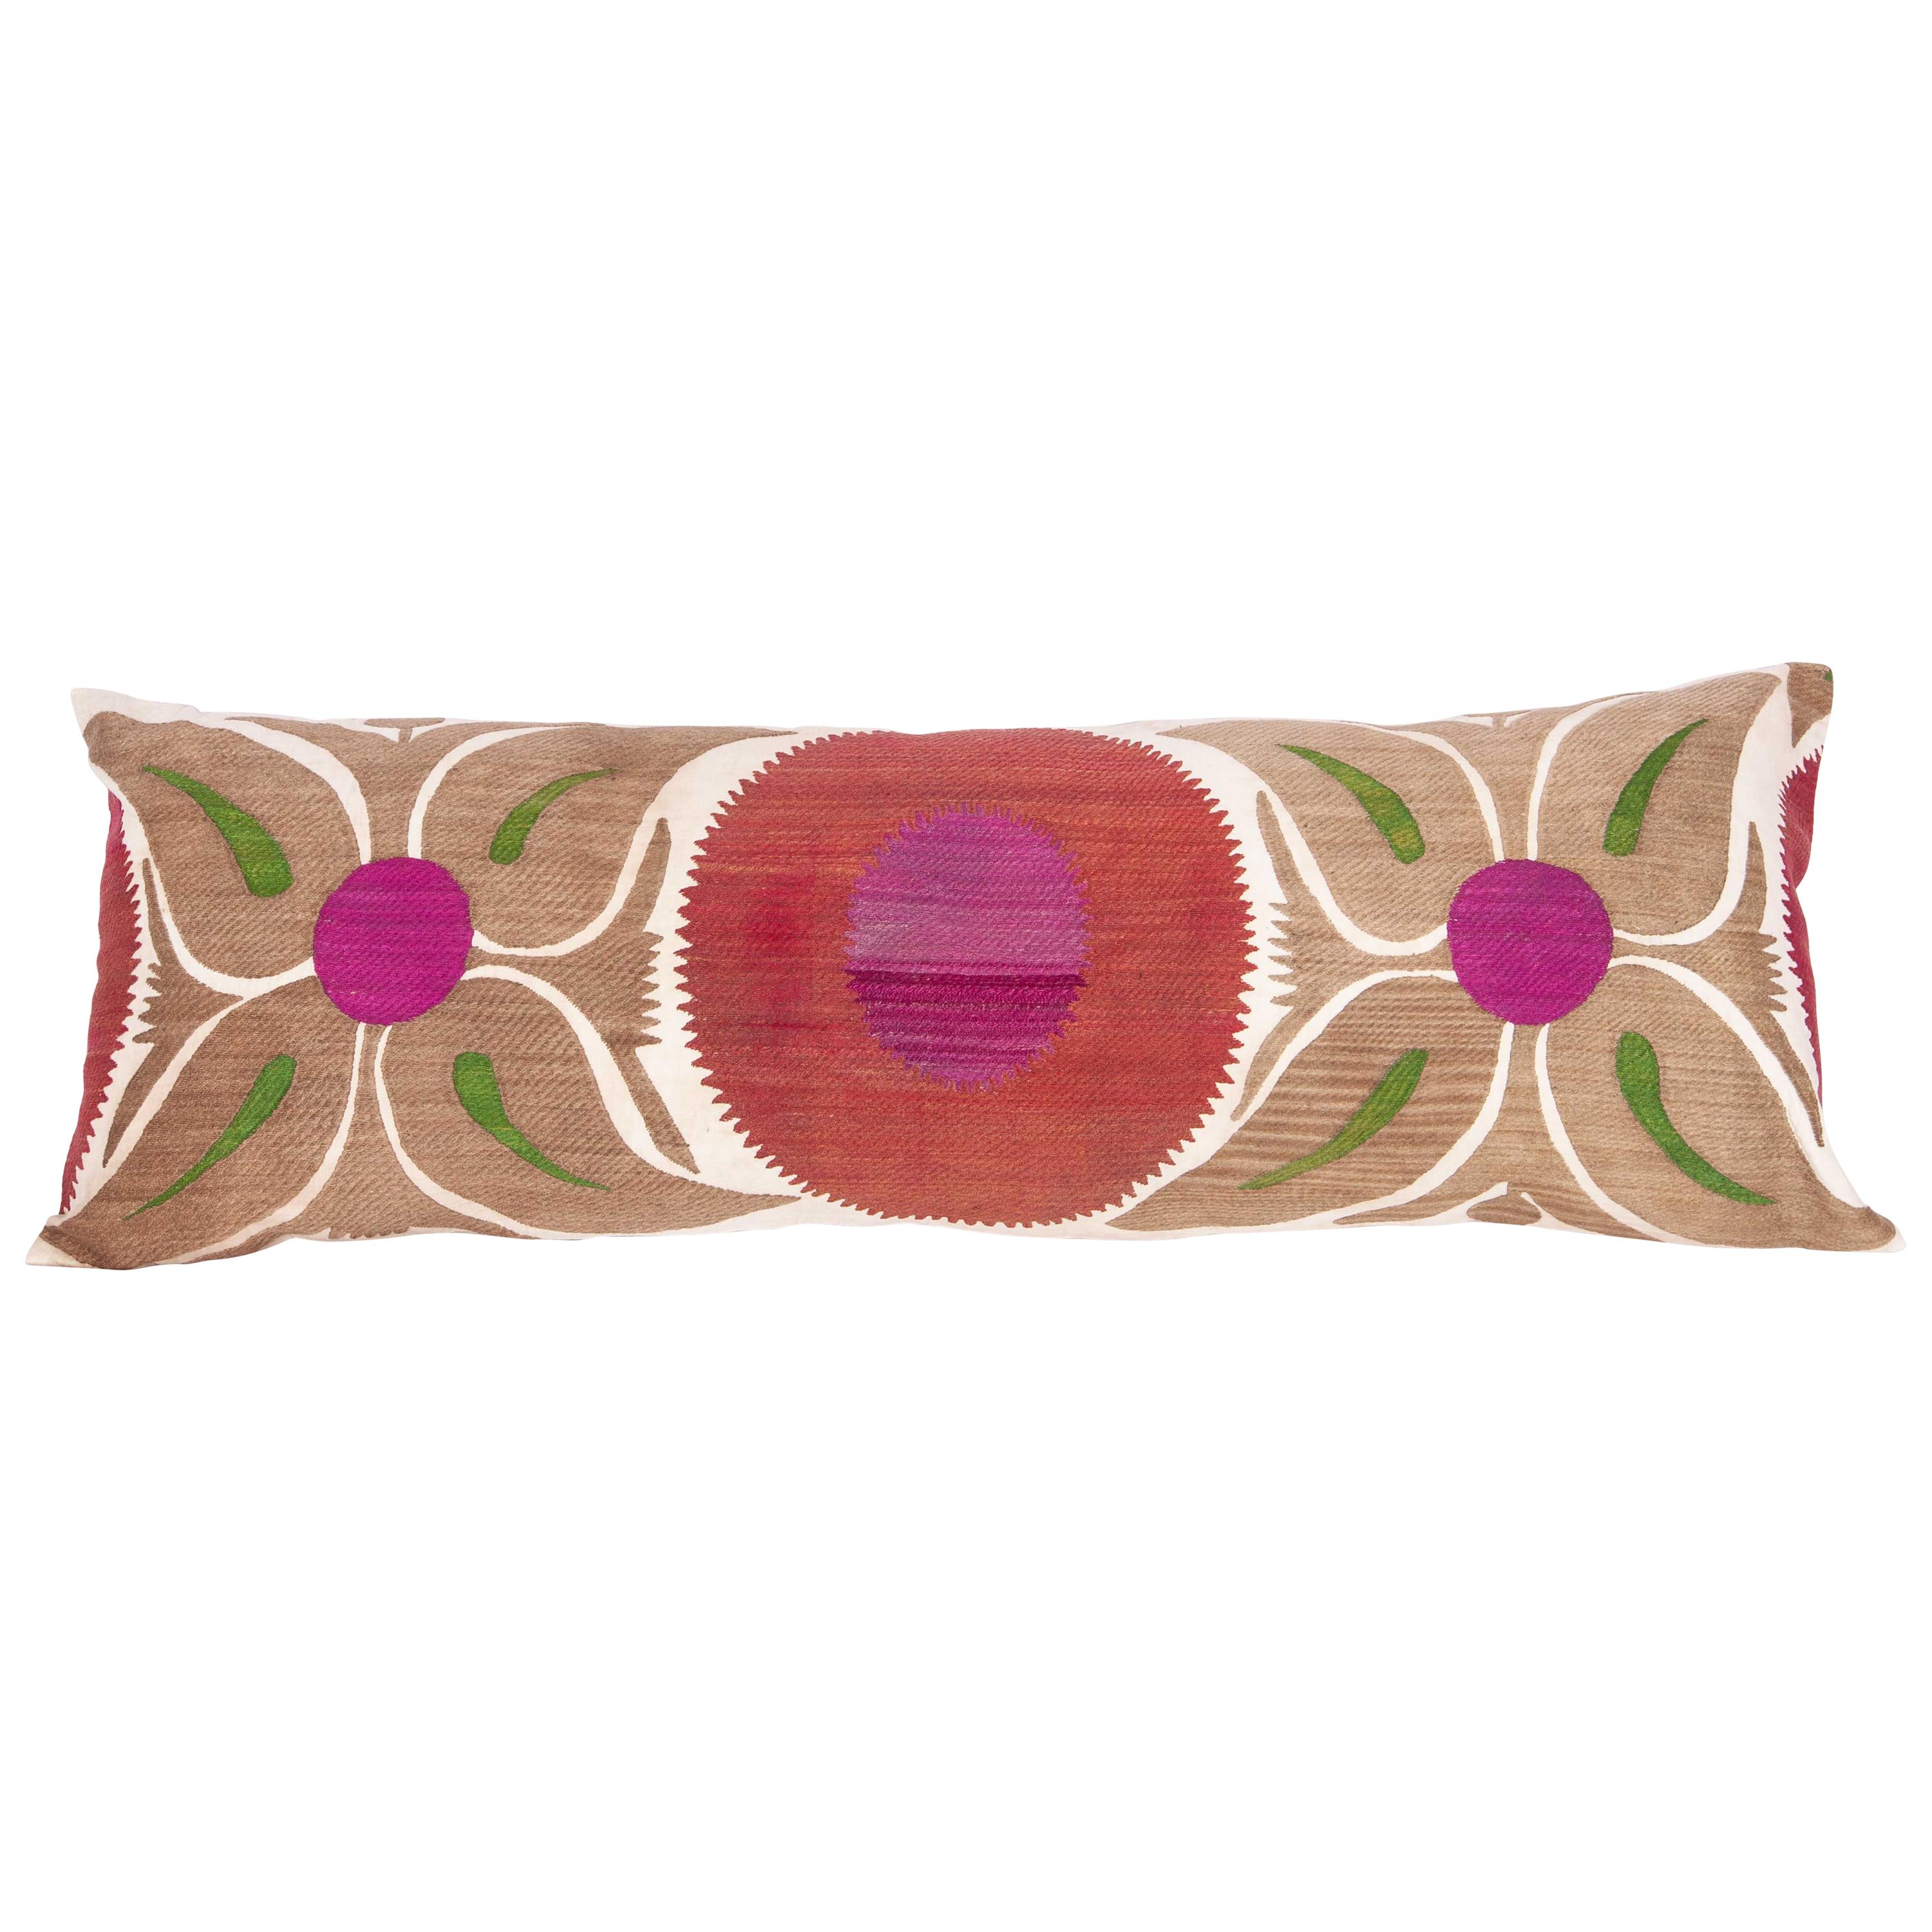 Old Suzani Pillow / Cushion Cover Fashioned from a Mid-20th Cenury Suzani